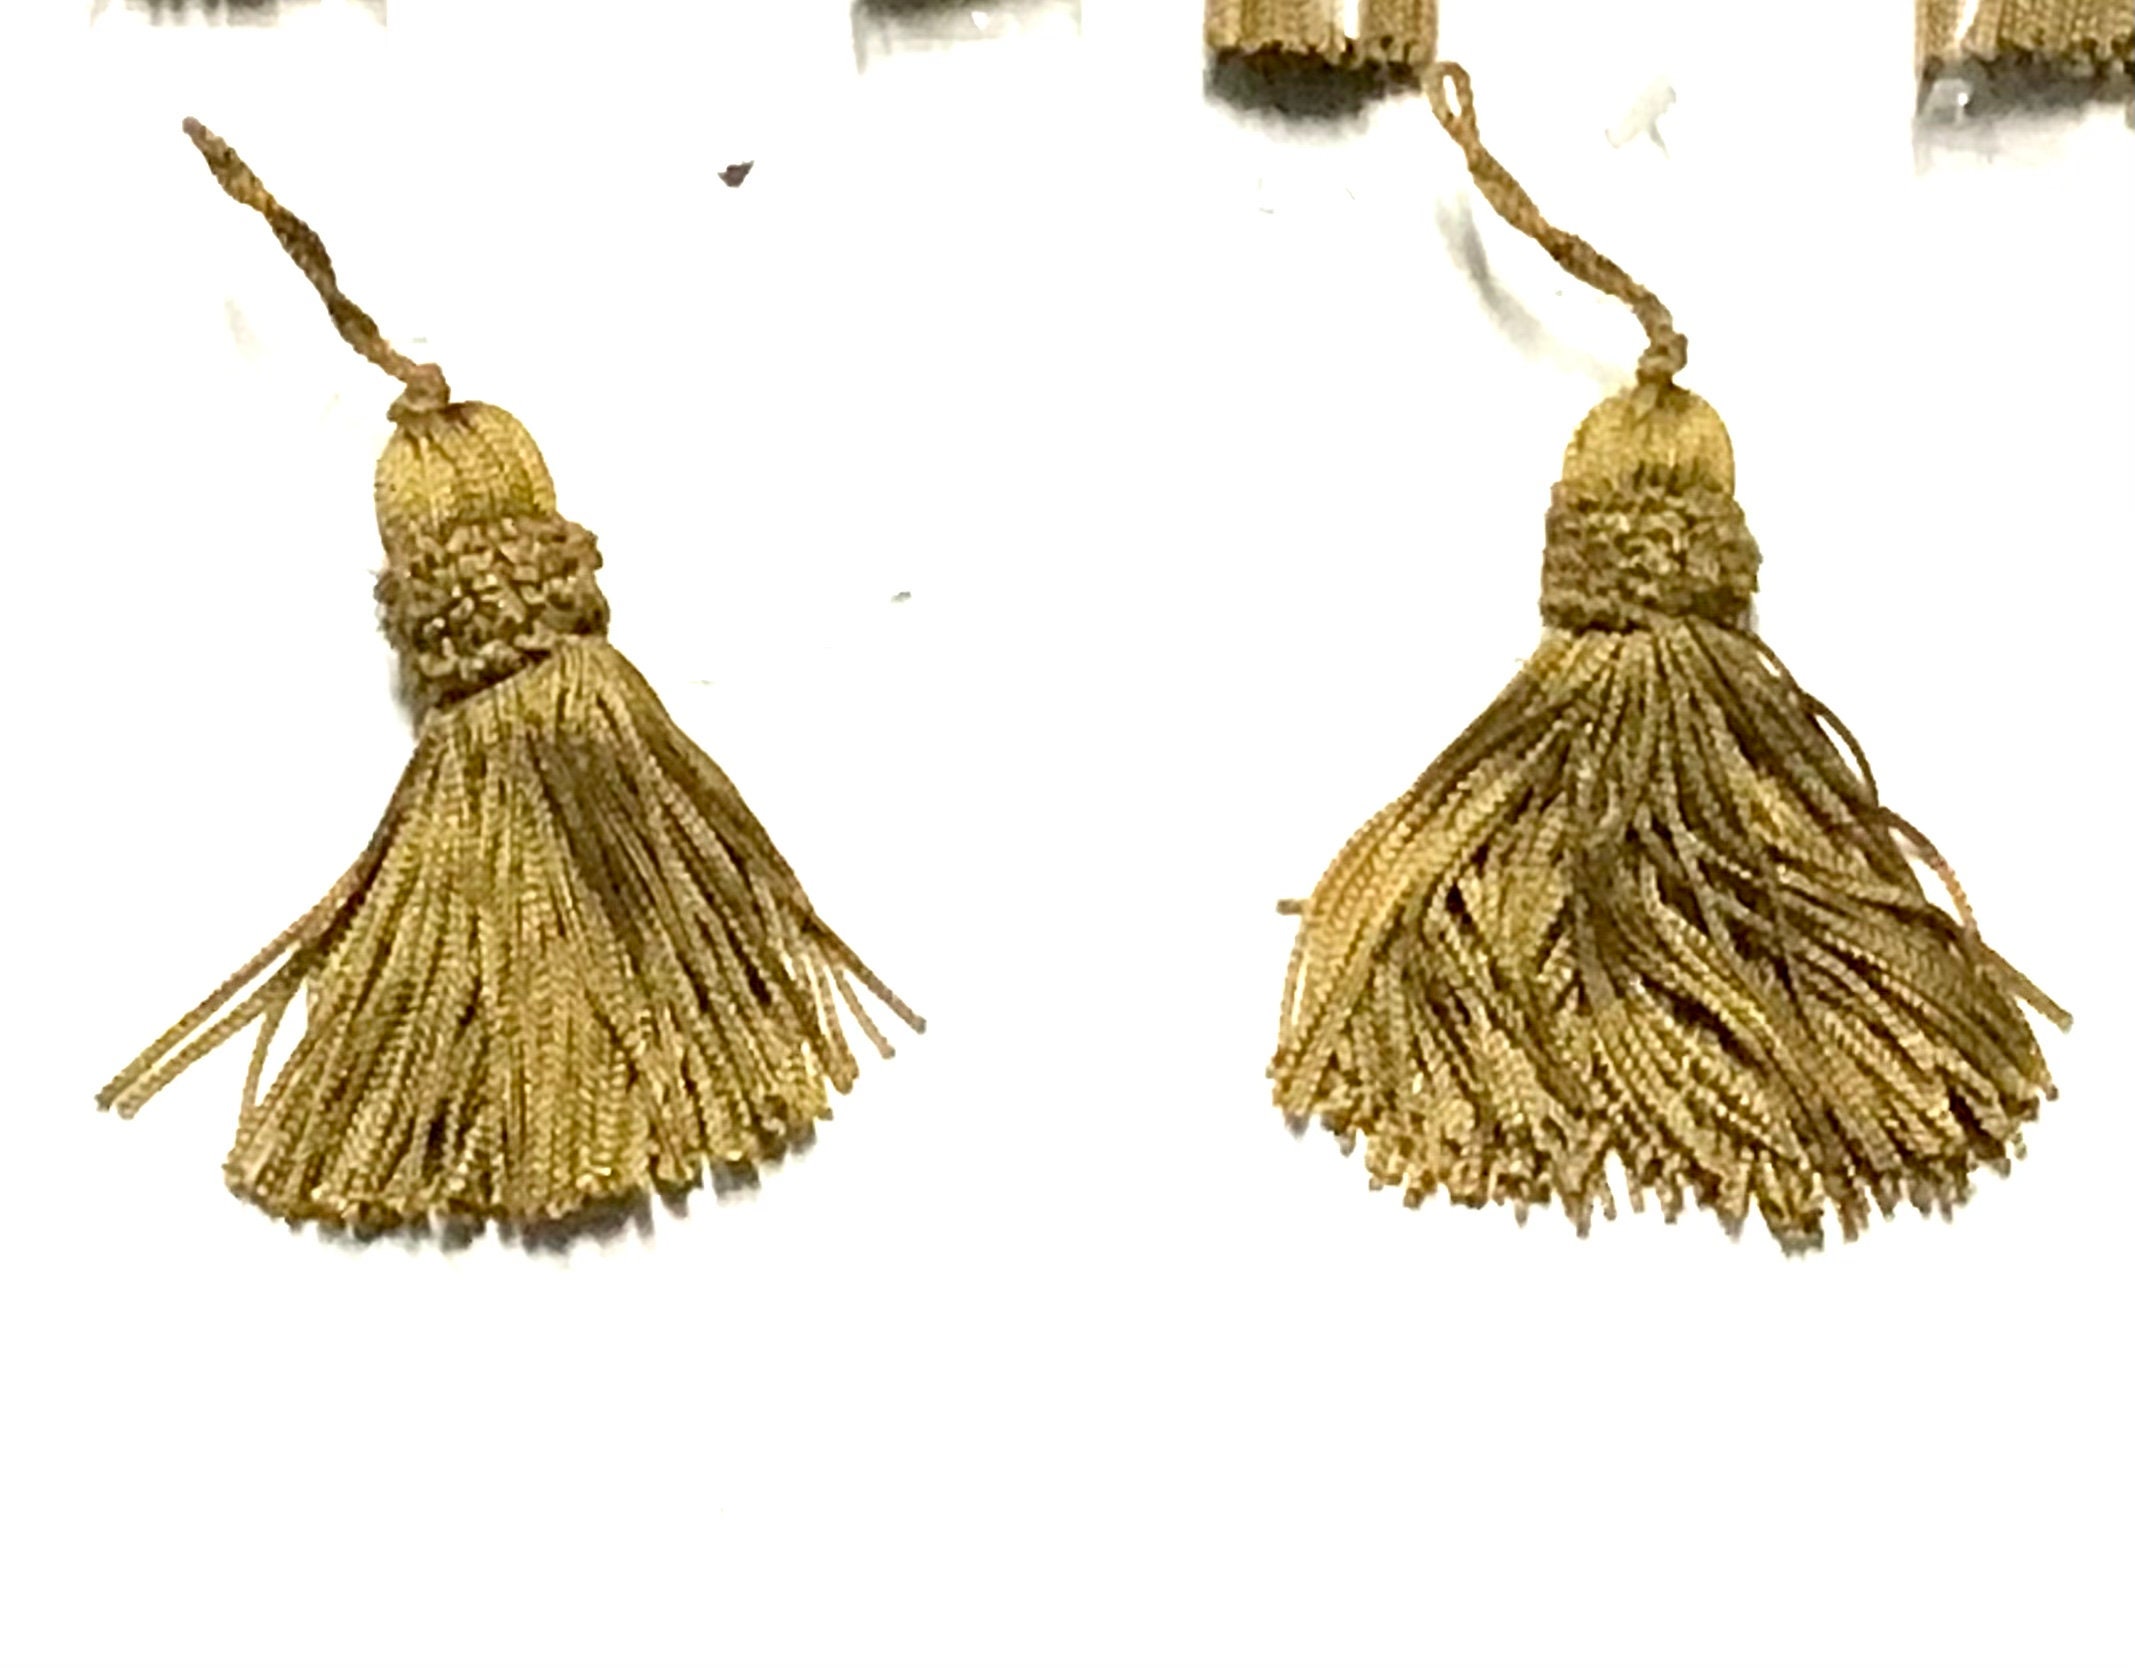 Mini Jewelry Tassels for DIY Crafts, Cotton Earring Charms, GOLD